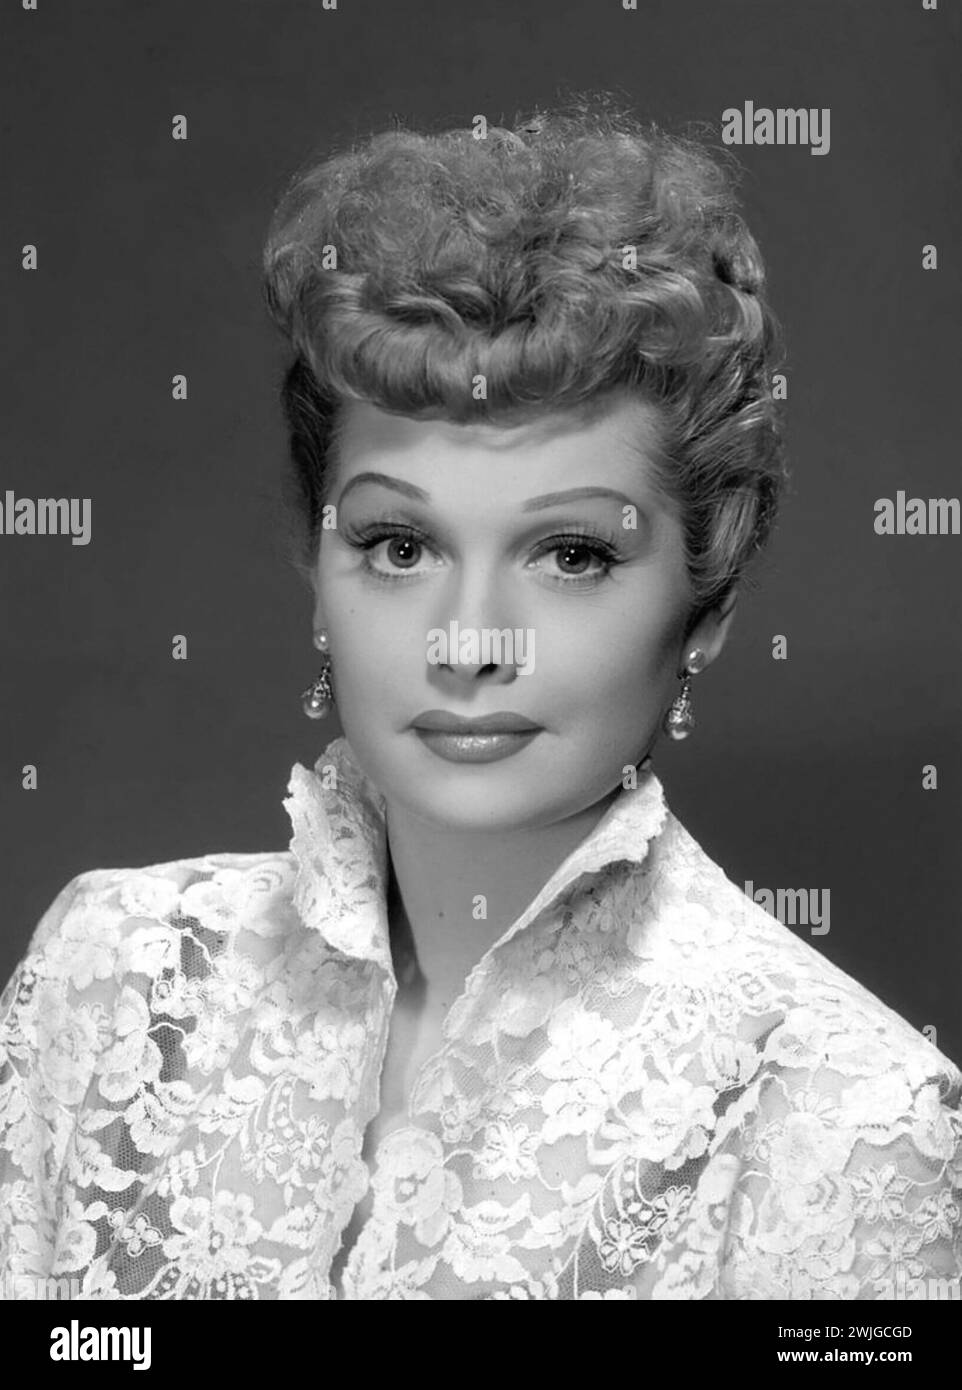 Lucille Ball. Portrait of the American actress and comedienne, Lucille Désirée Ball (1911-1989), still from I Love Lucy episode 'Face to Face', 1955 Stock Photo